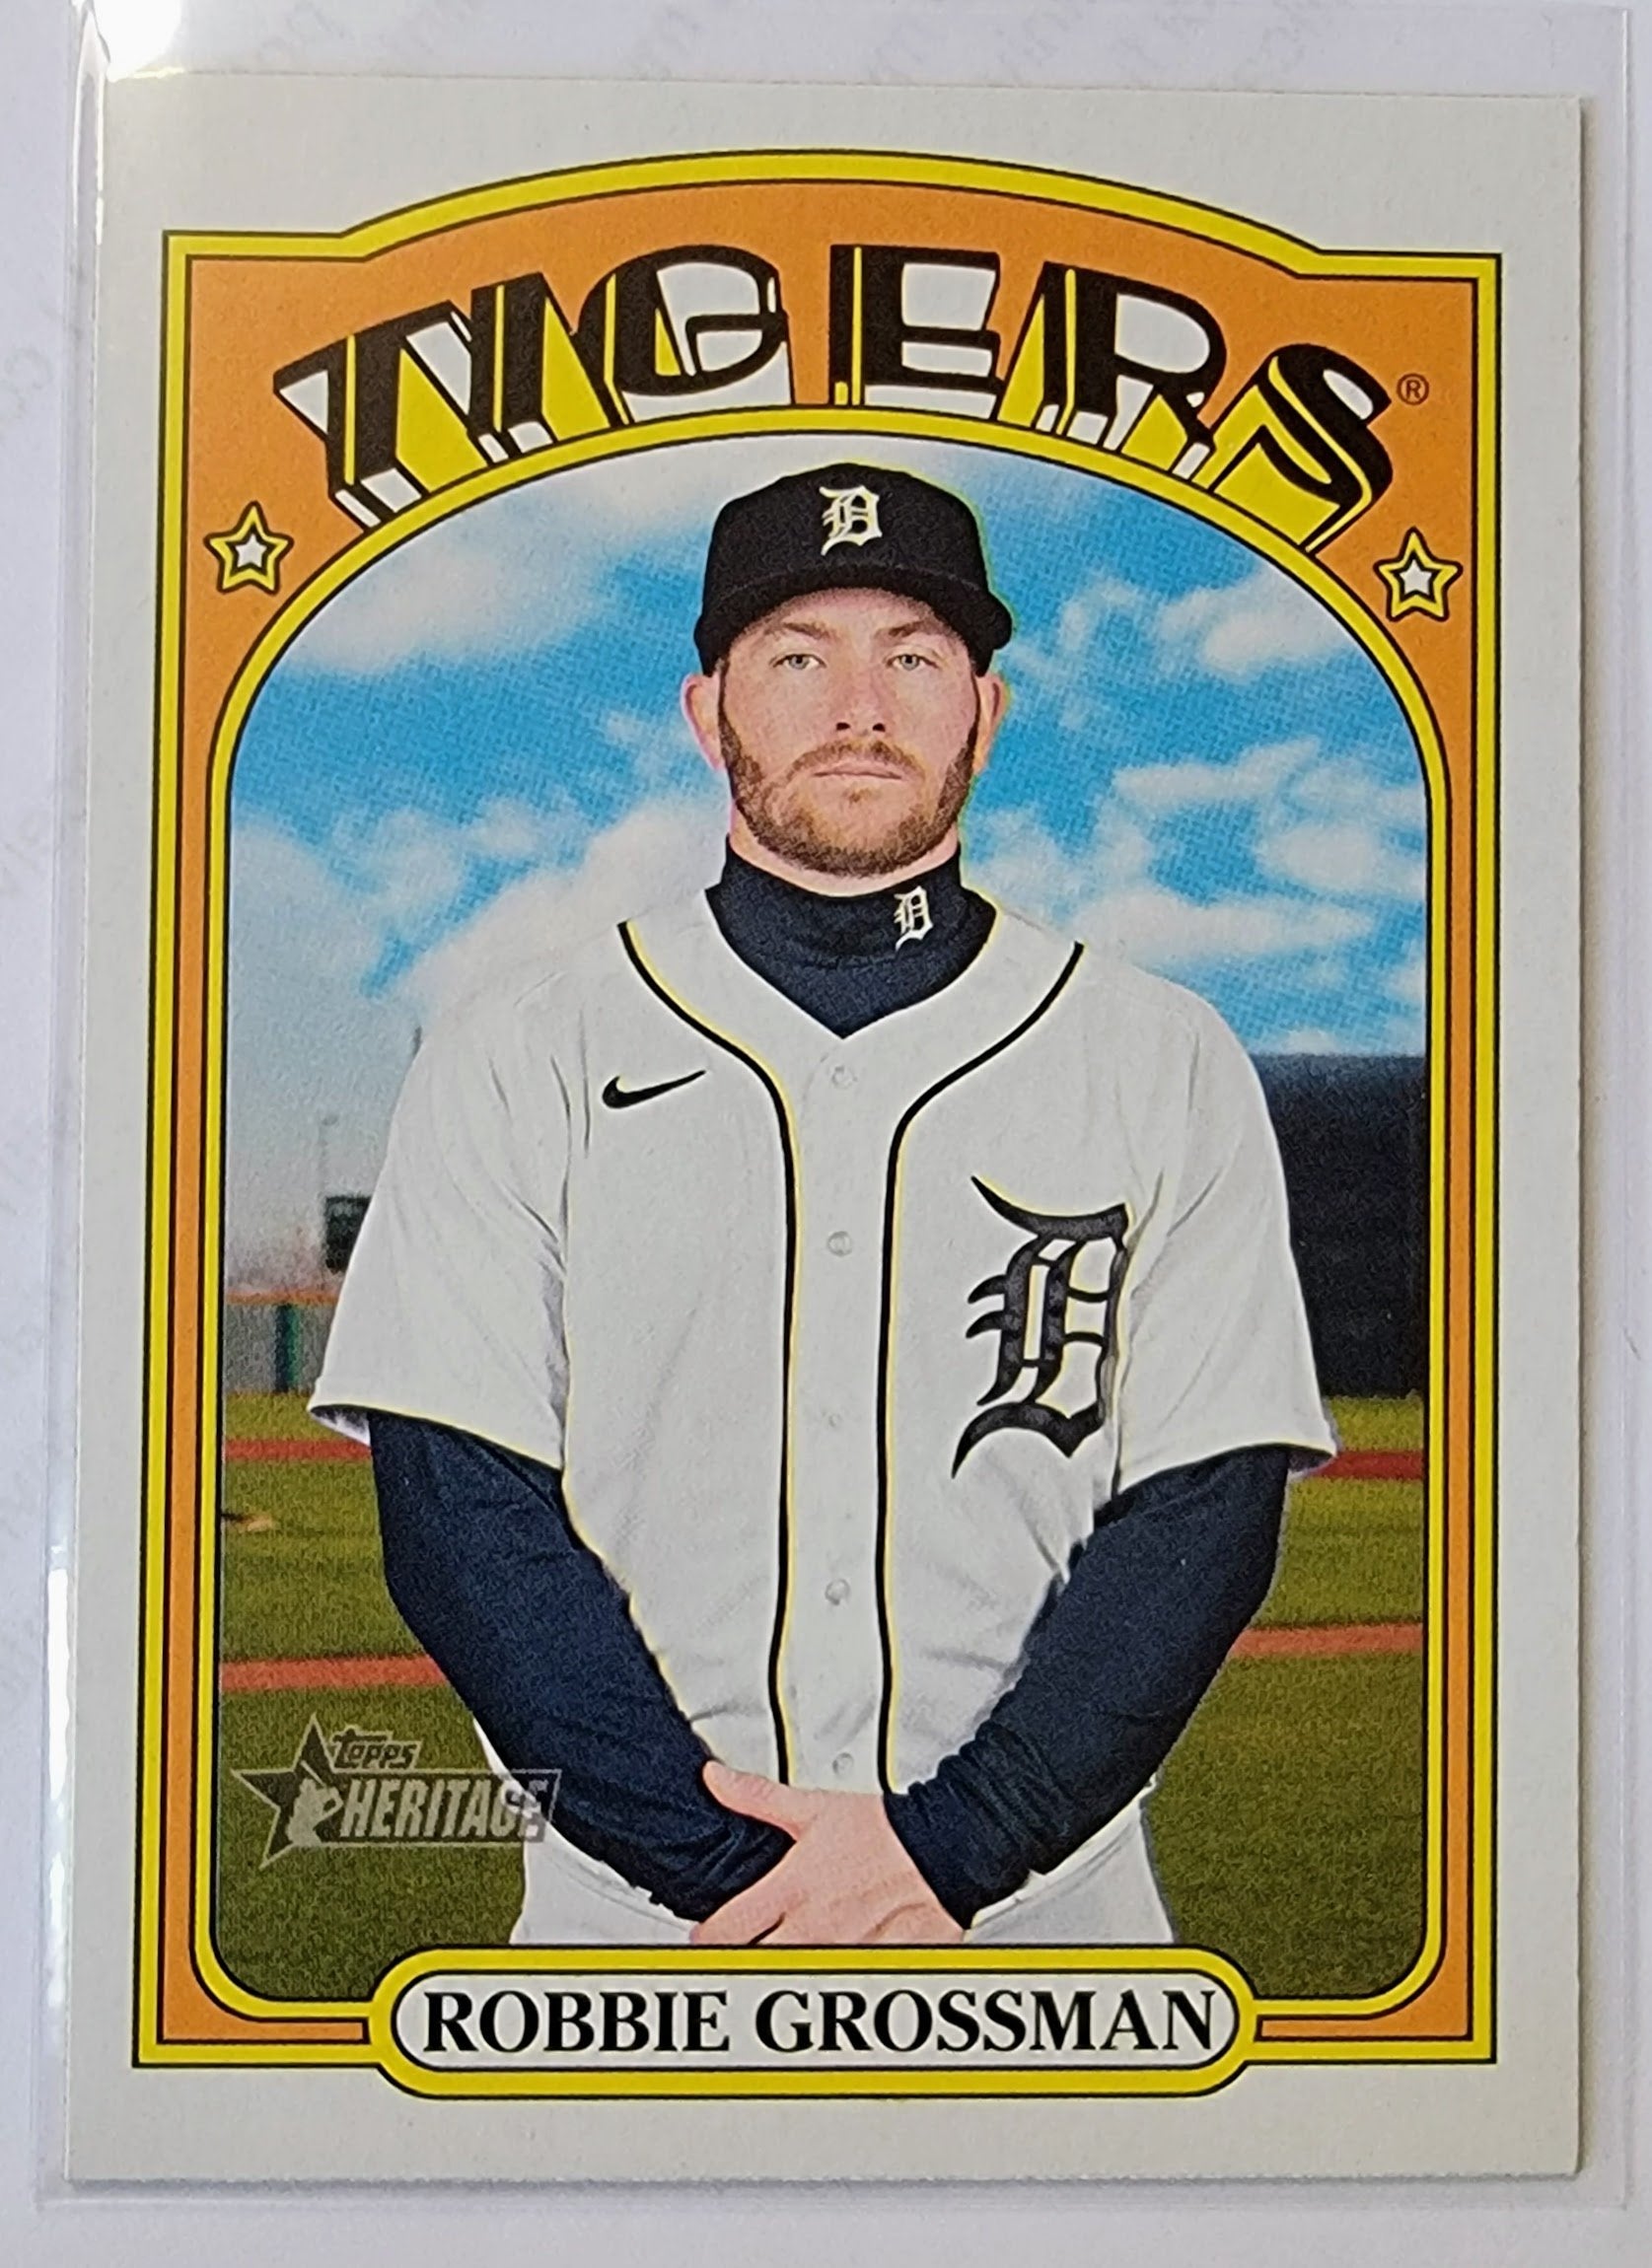 2021 Topps Heritage Robbie Grossman Baseball Trading Card MCSC1 simple Xclusive Collectibles   